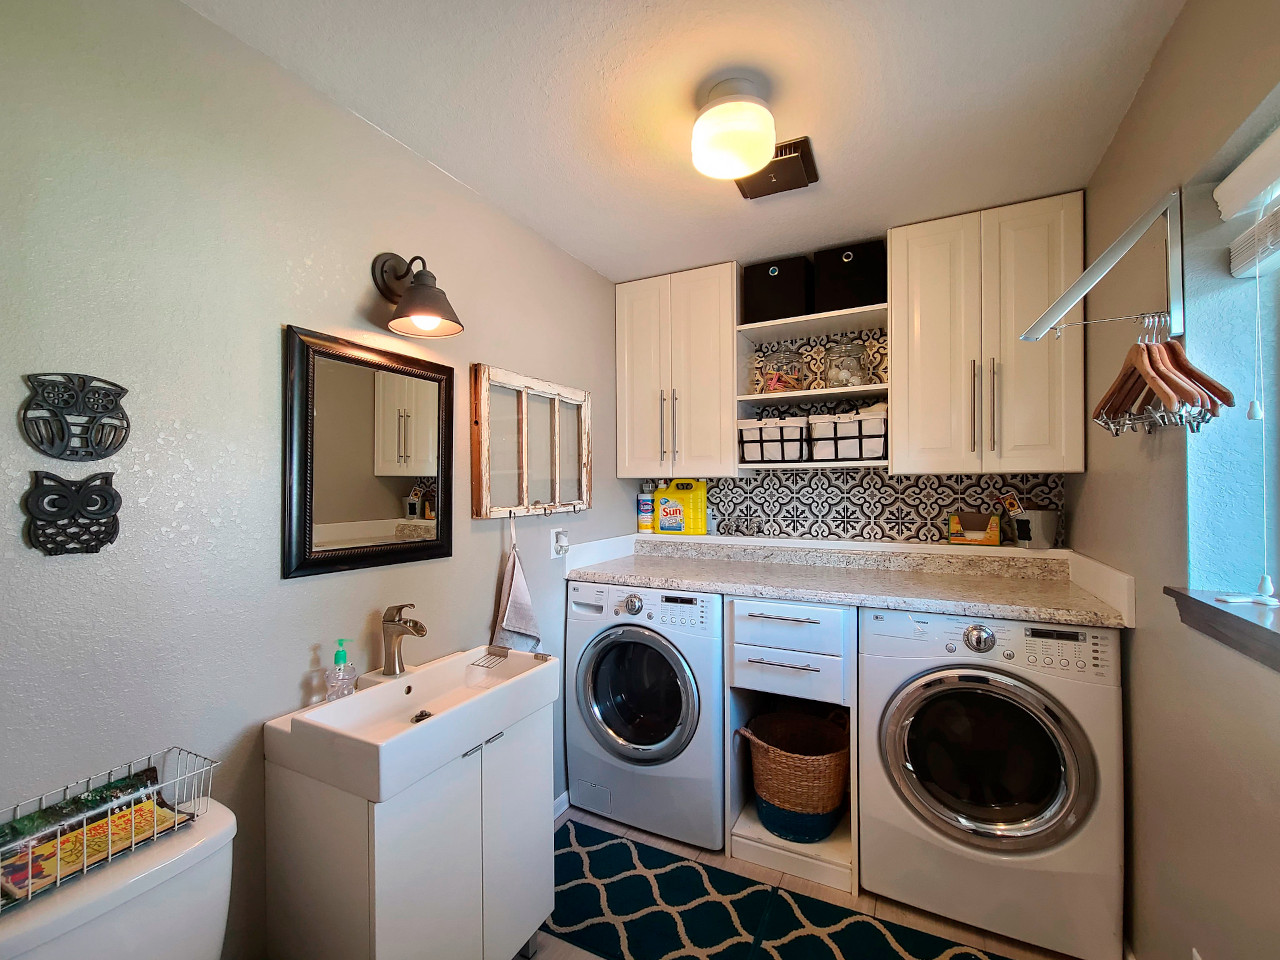 Integrate Your Laundry Room Into Your Bathroom